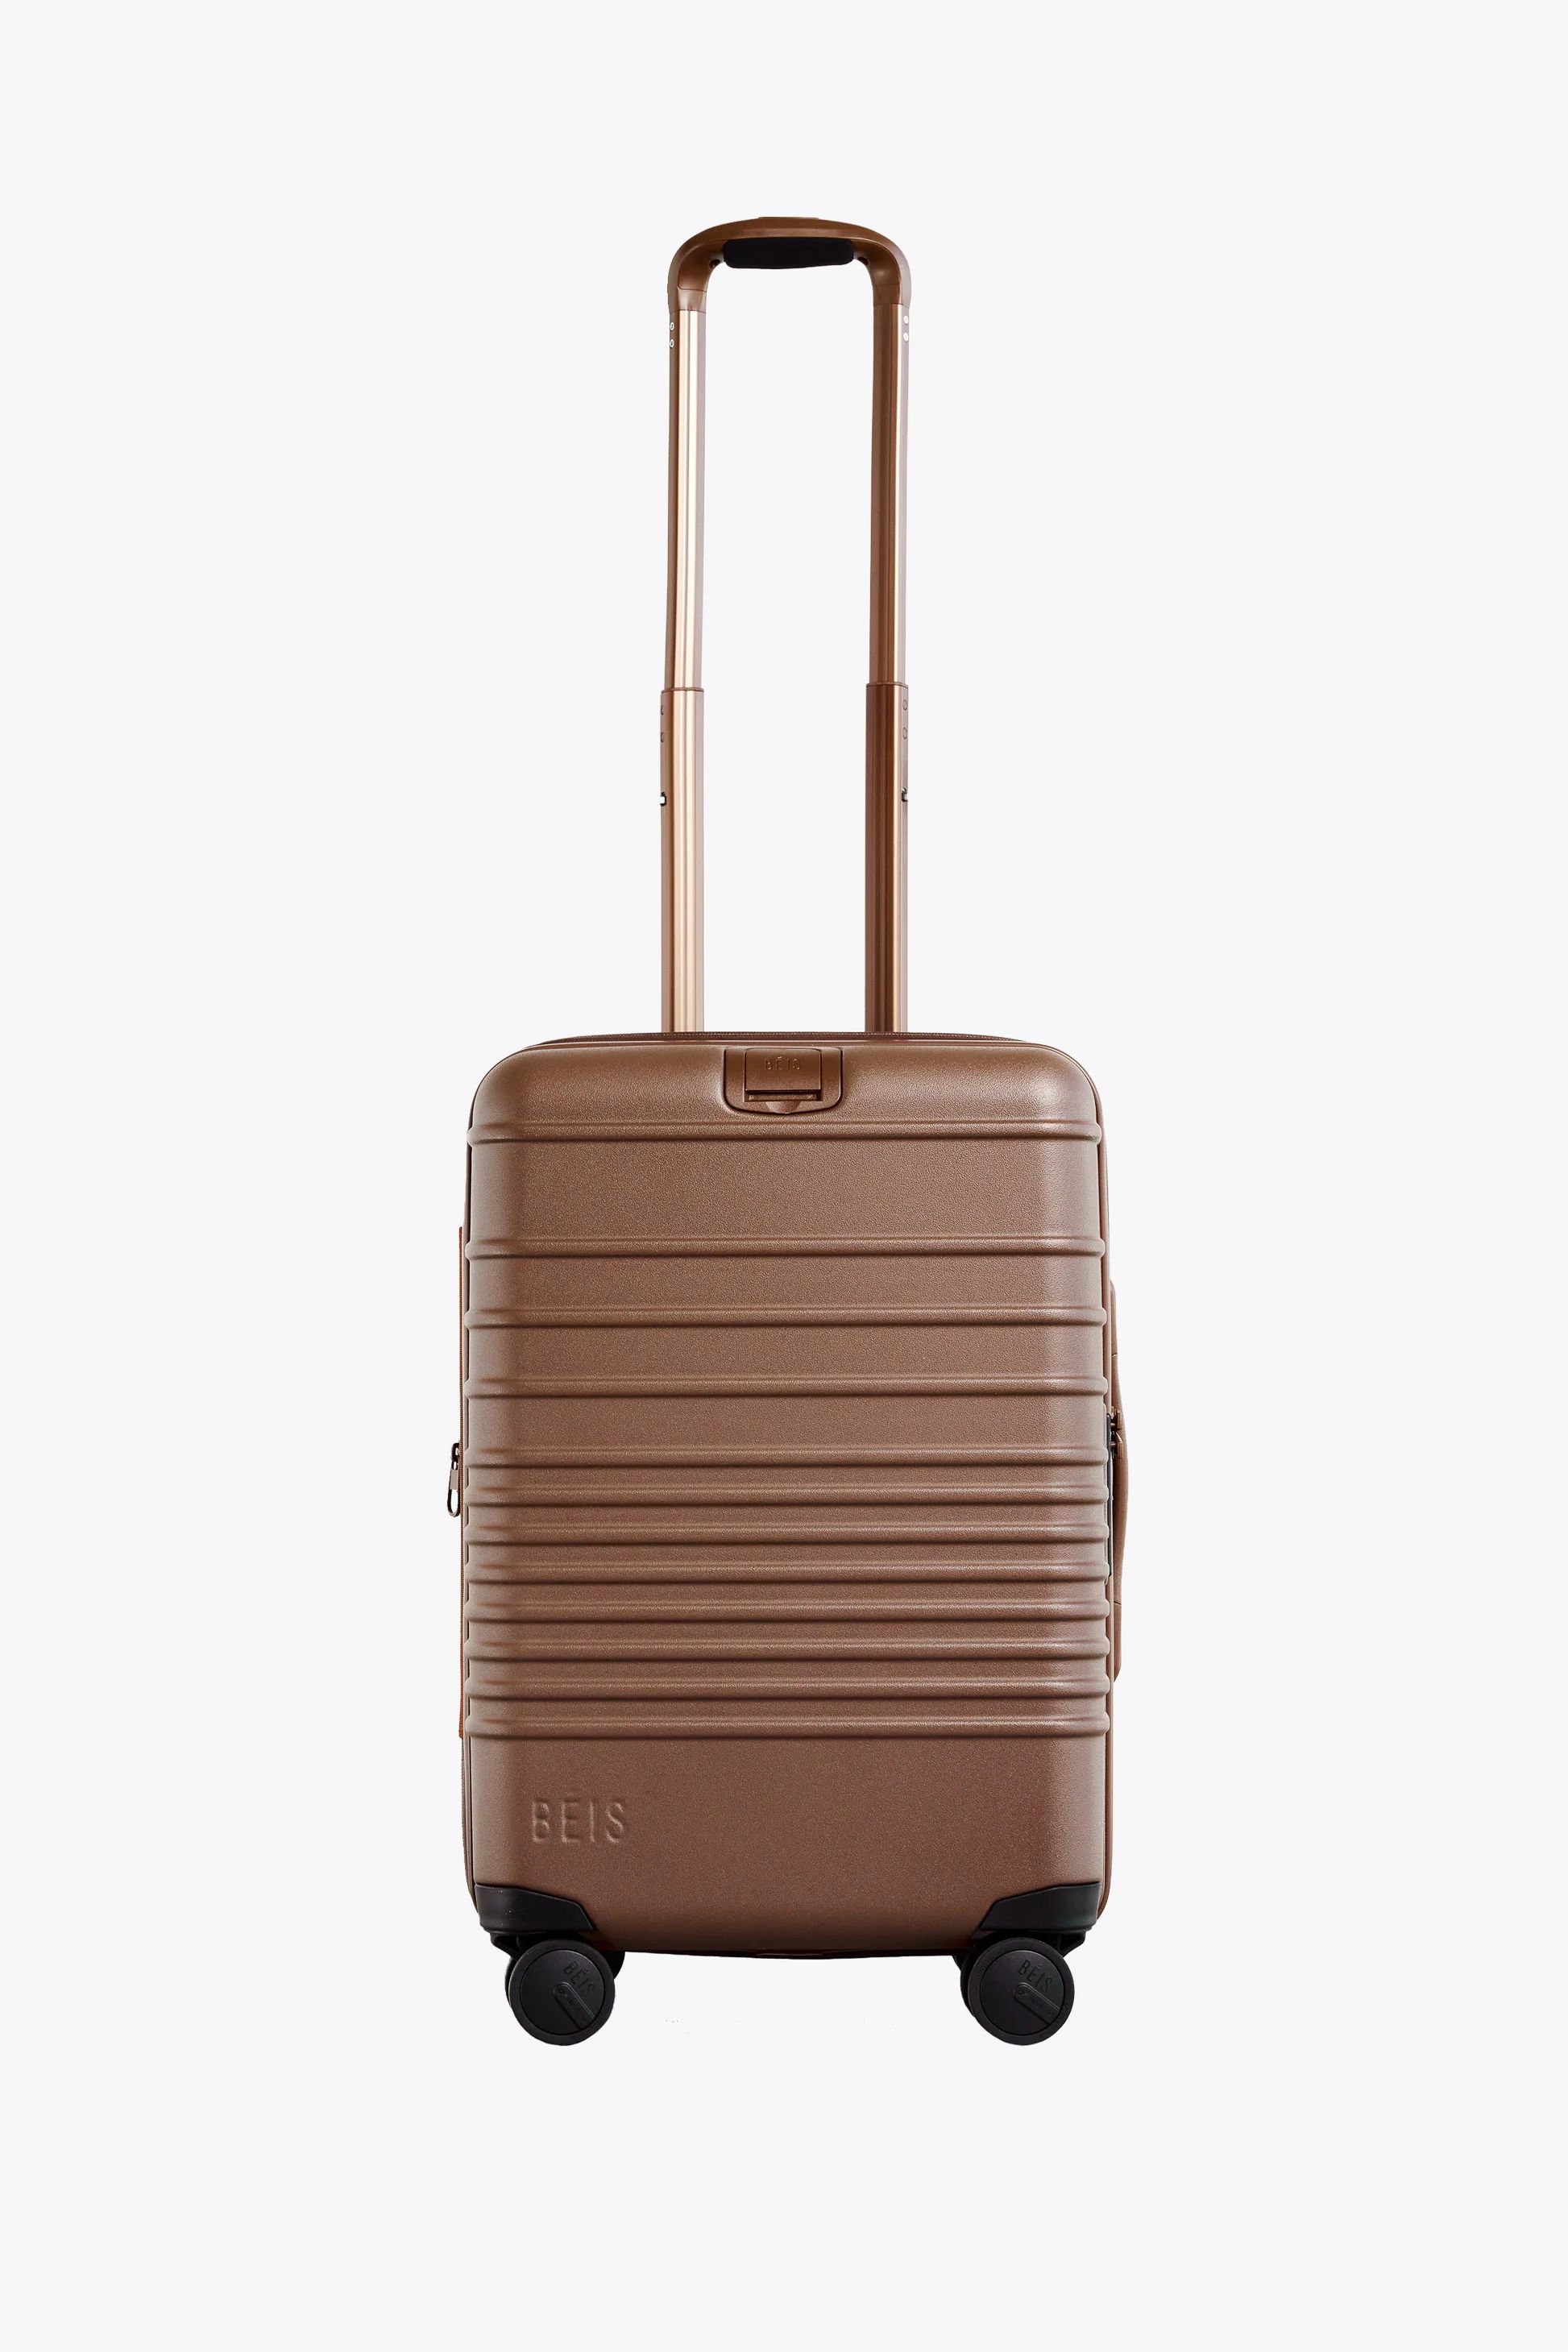 BÉIS 'The Carry-On Roller' in Maple - Brown Carry On Luggage & Hard Shell Suitcase | BÉIS Travel